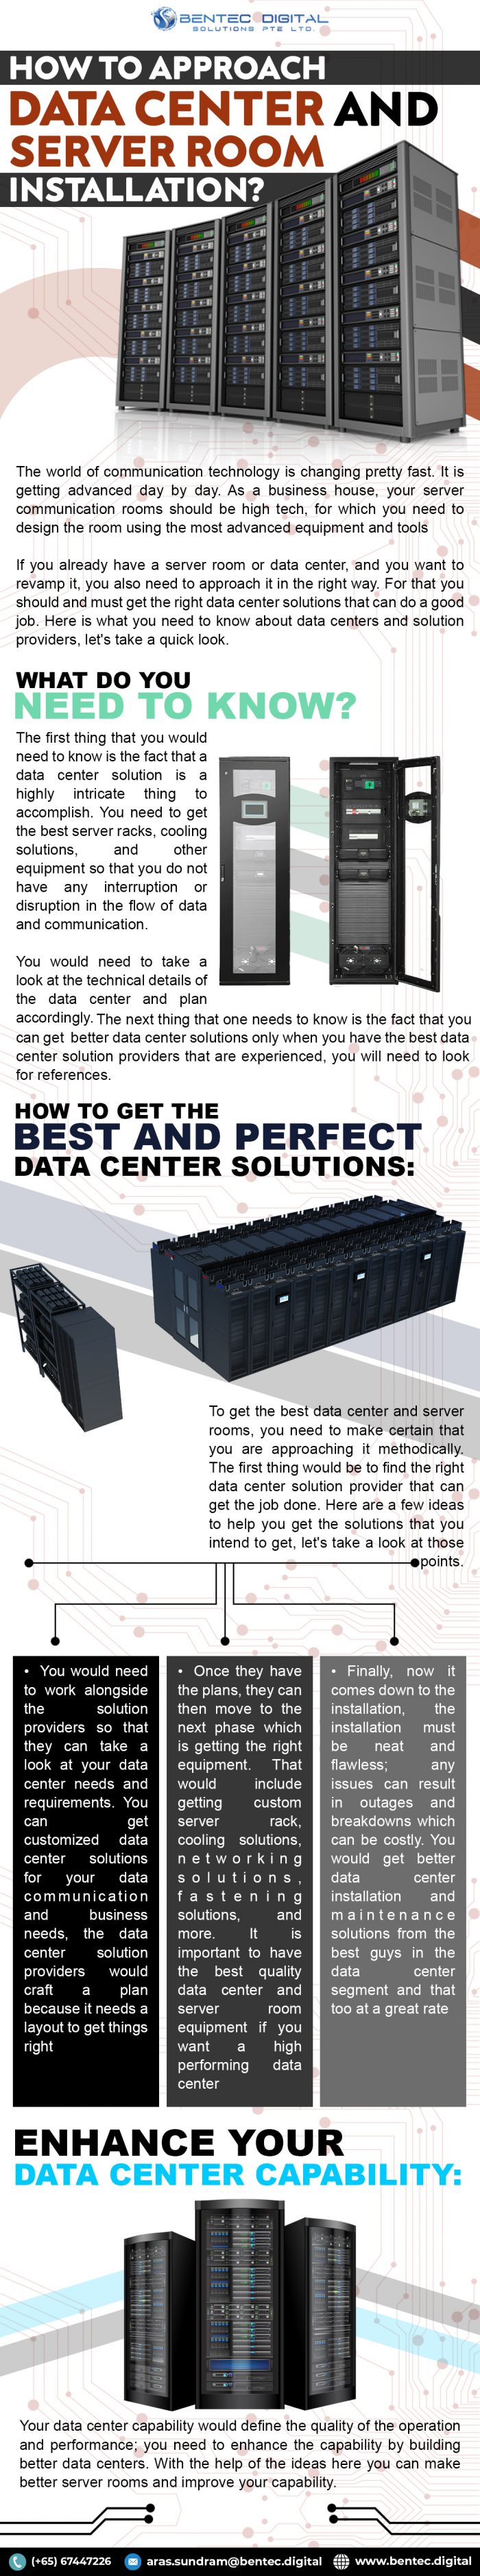 How To Approach Data Center And Server Room Installation